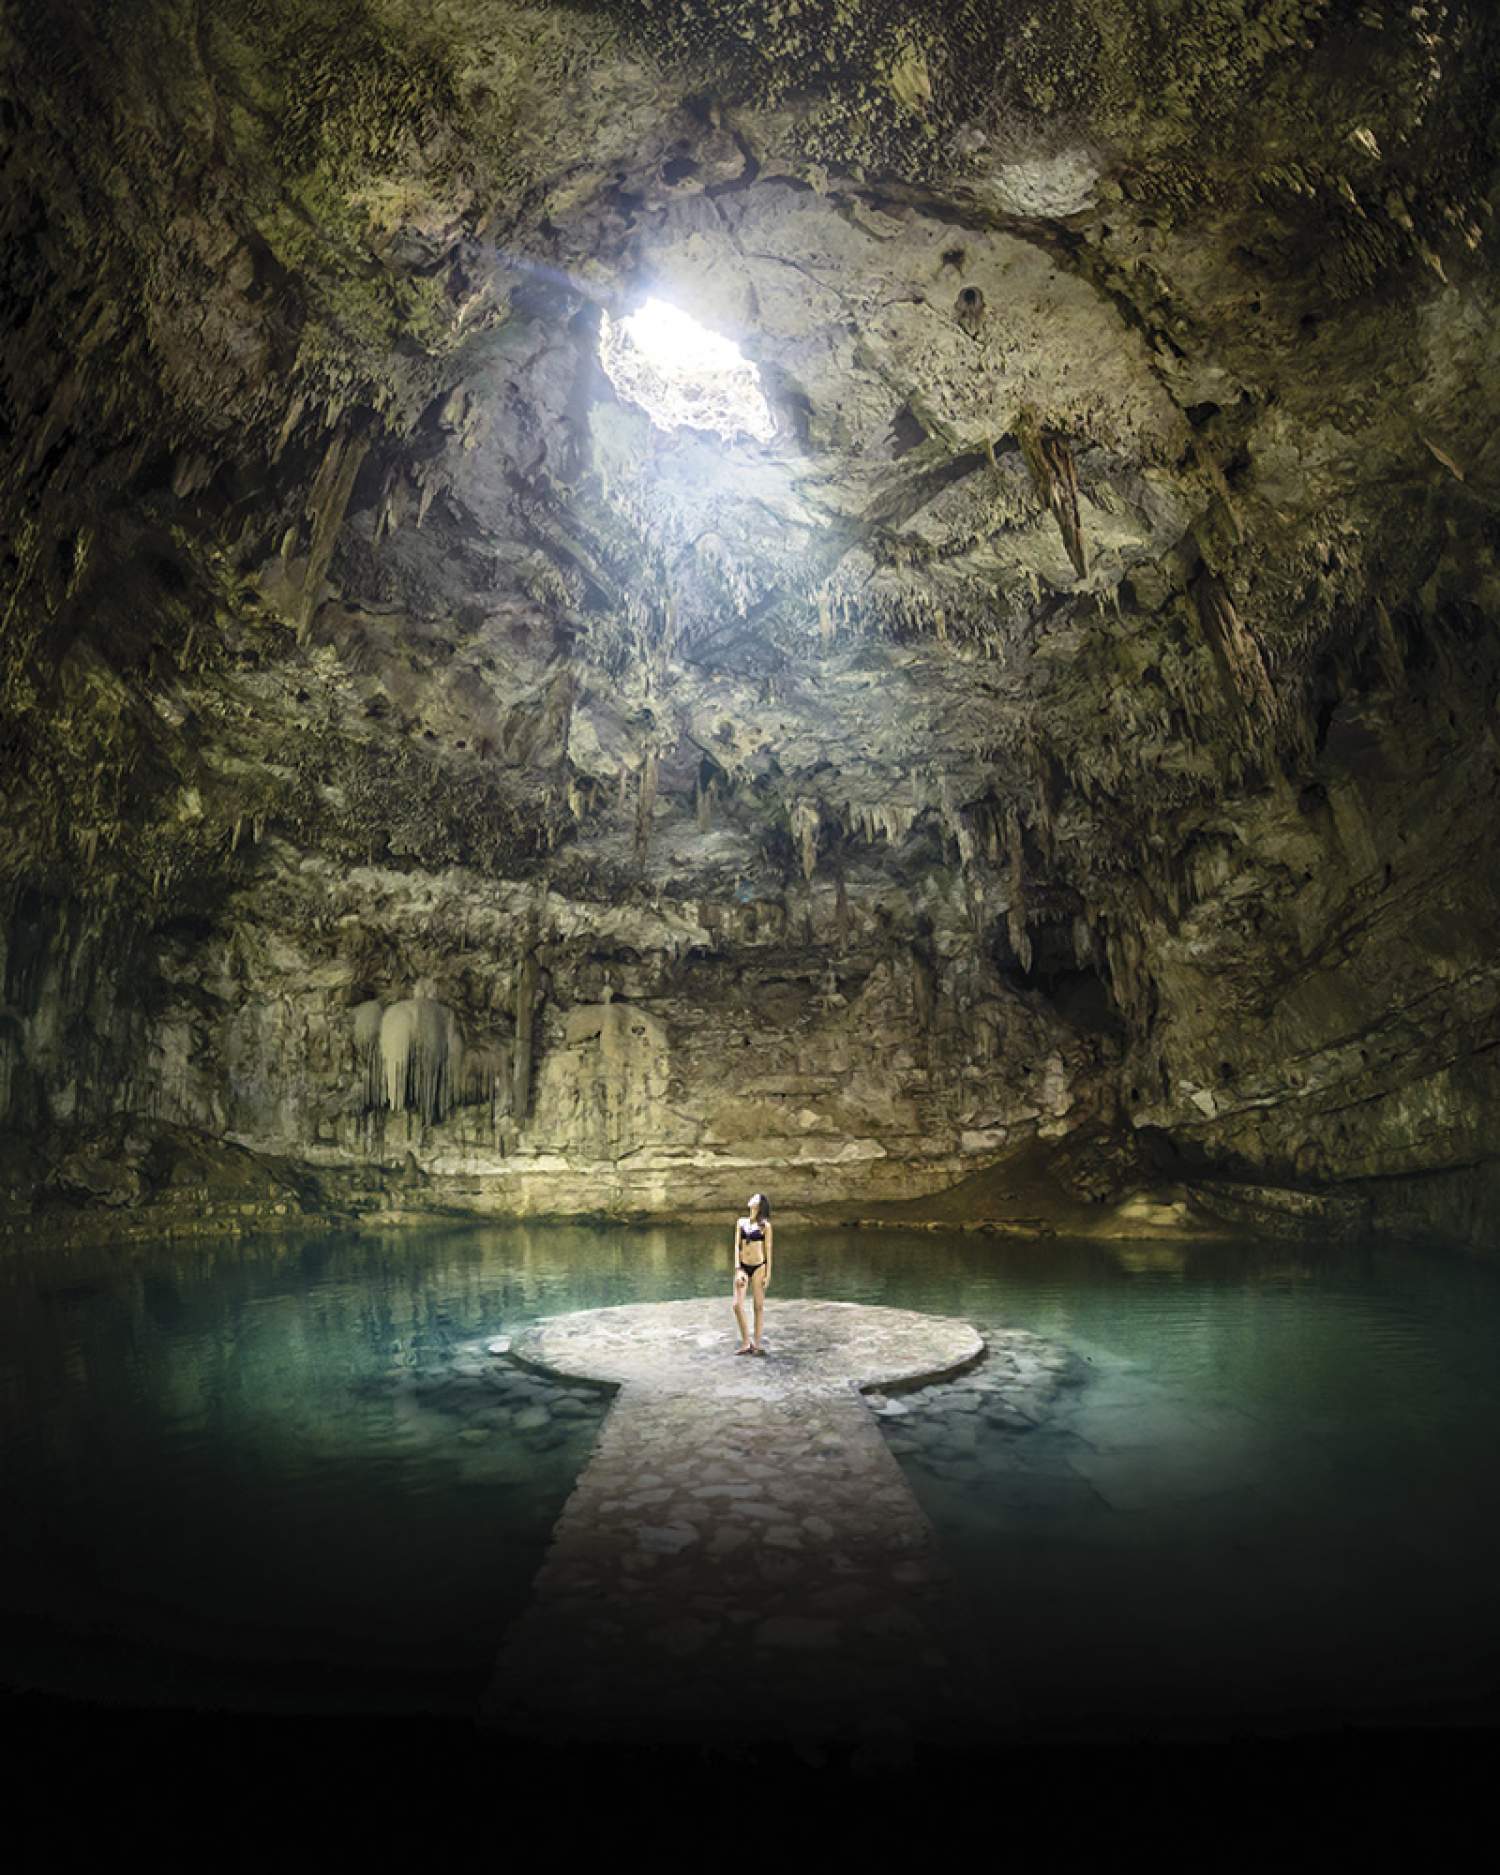 Lexie in a cenote, Yucatan, Mexico during her round-the-world trip